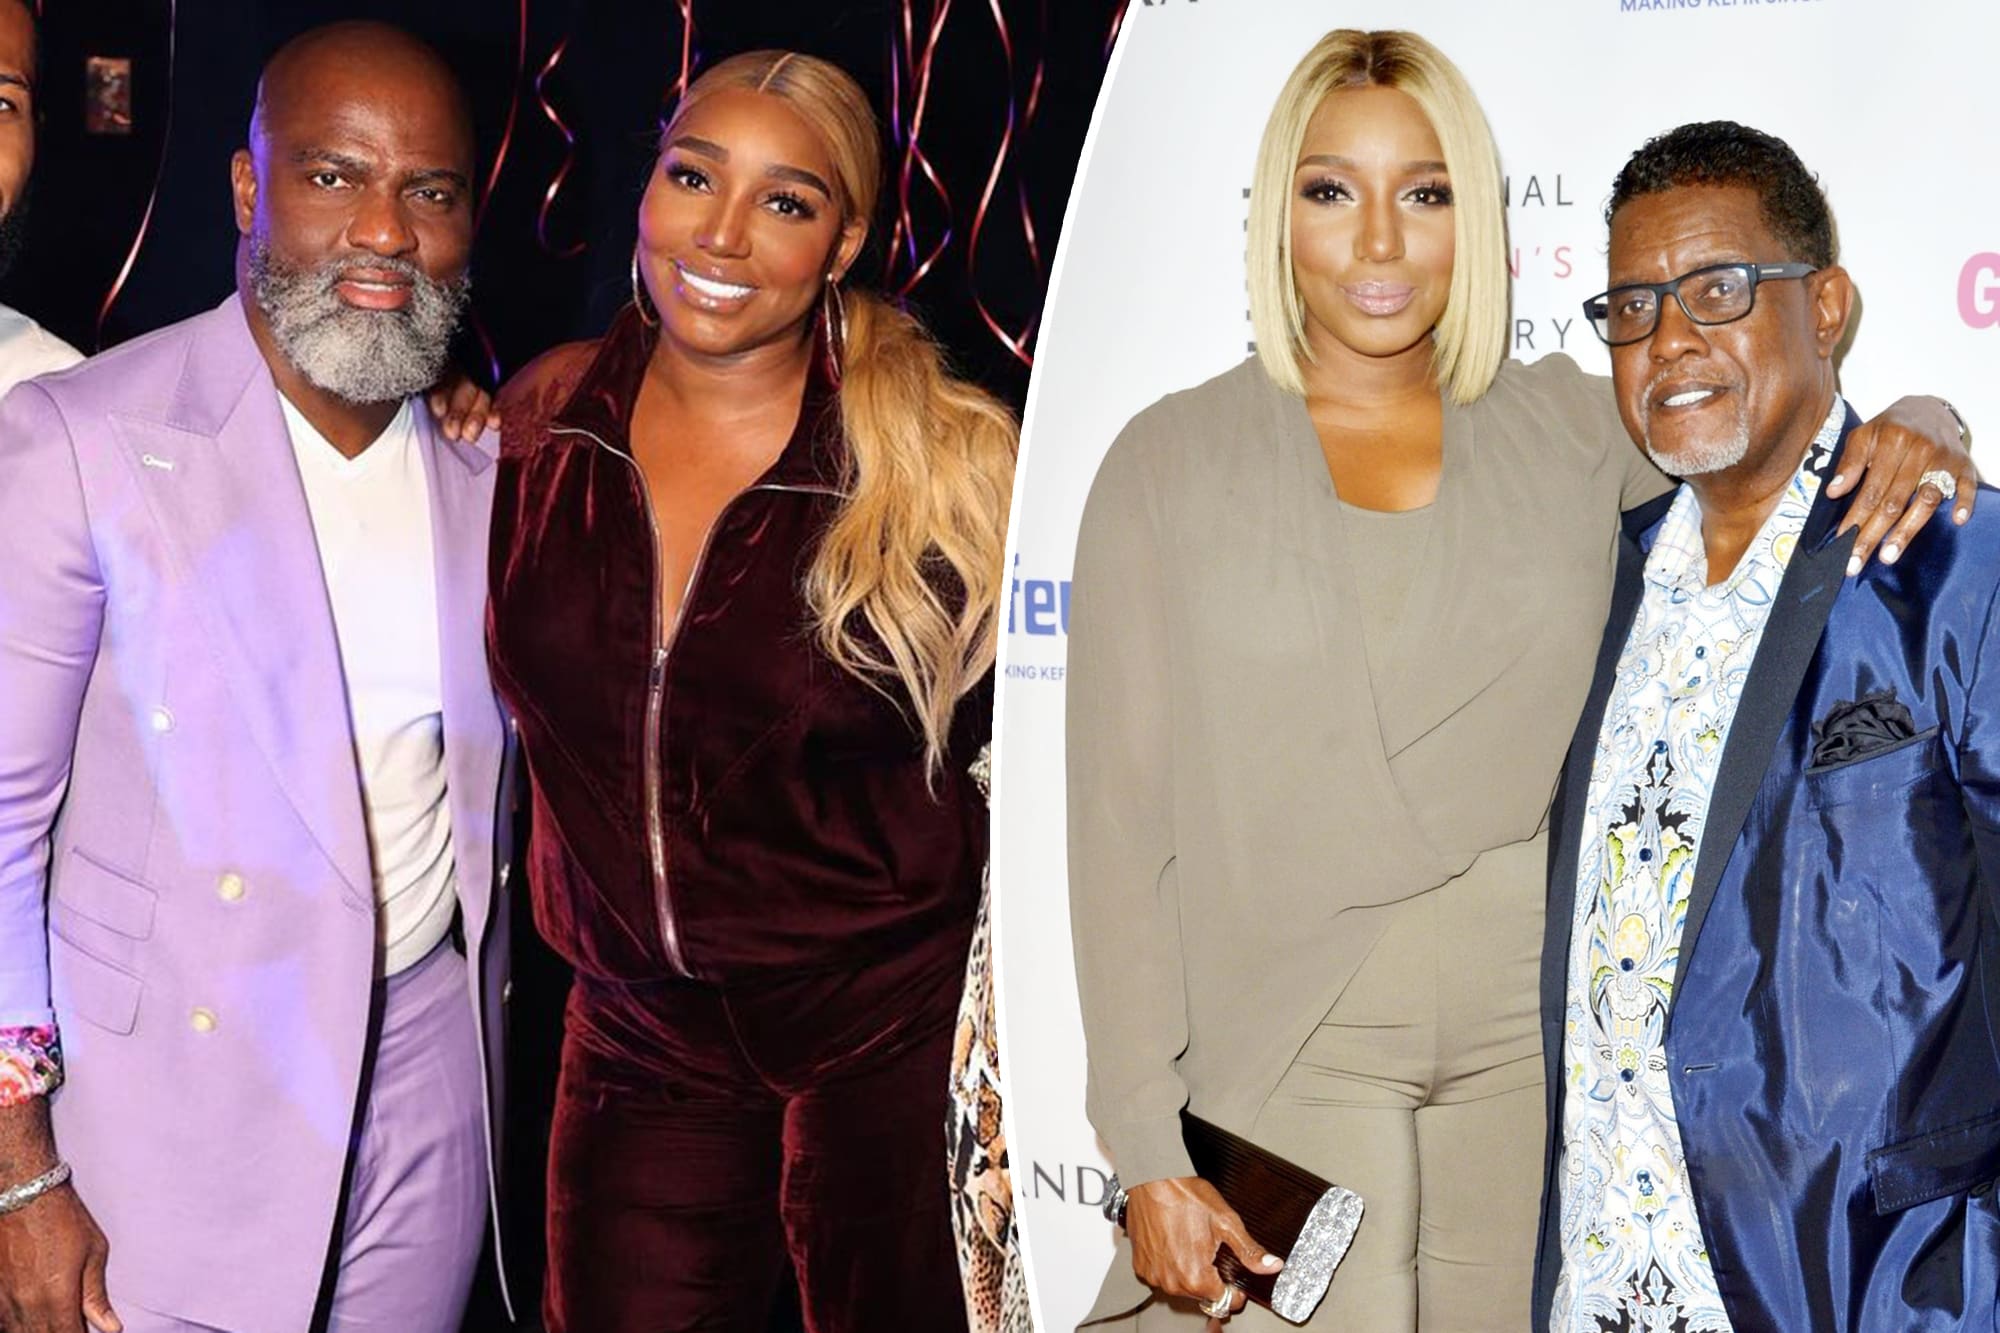 nene-leakes-has-fans-excited-with-this-new-announcement-she-is-dating-someone